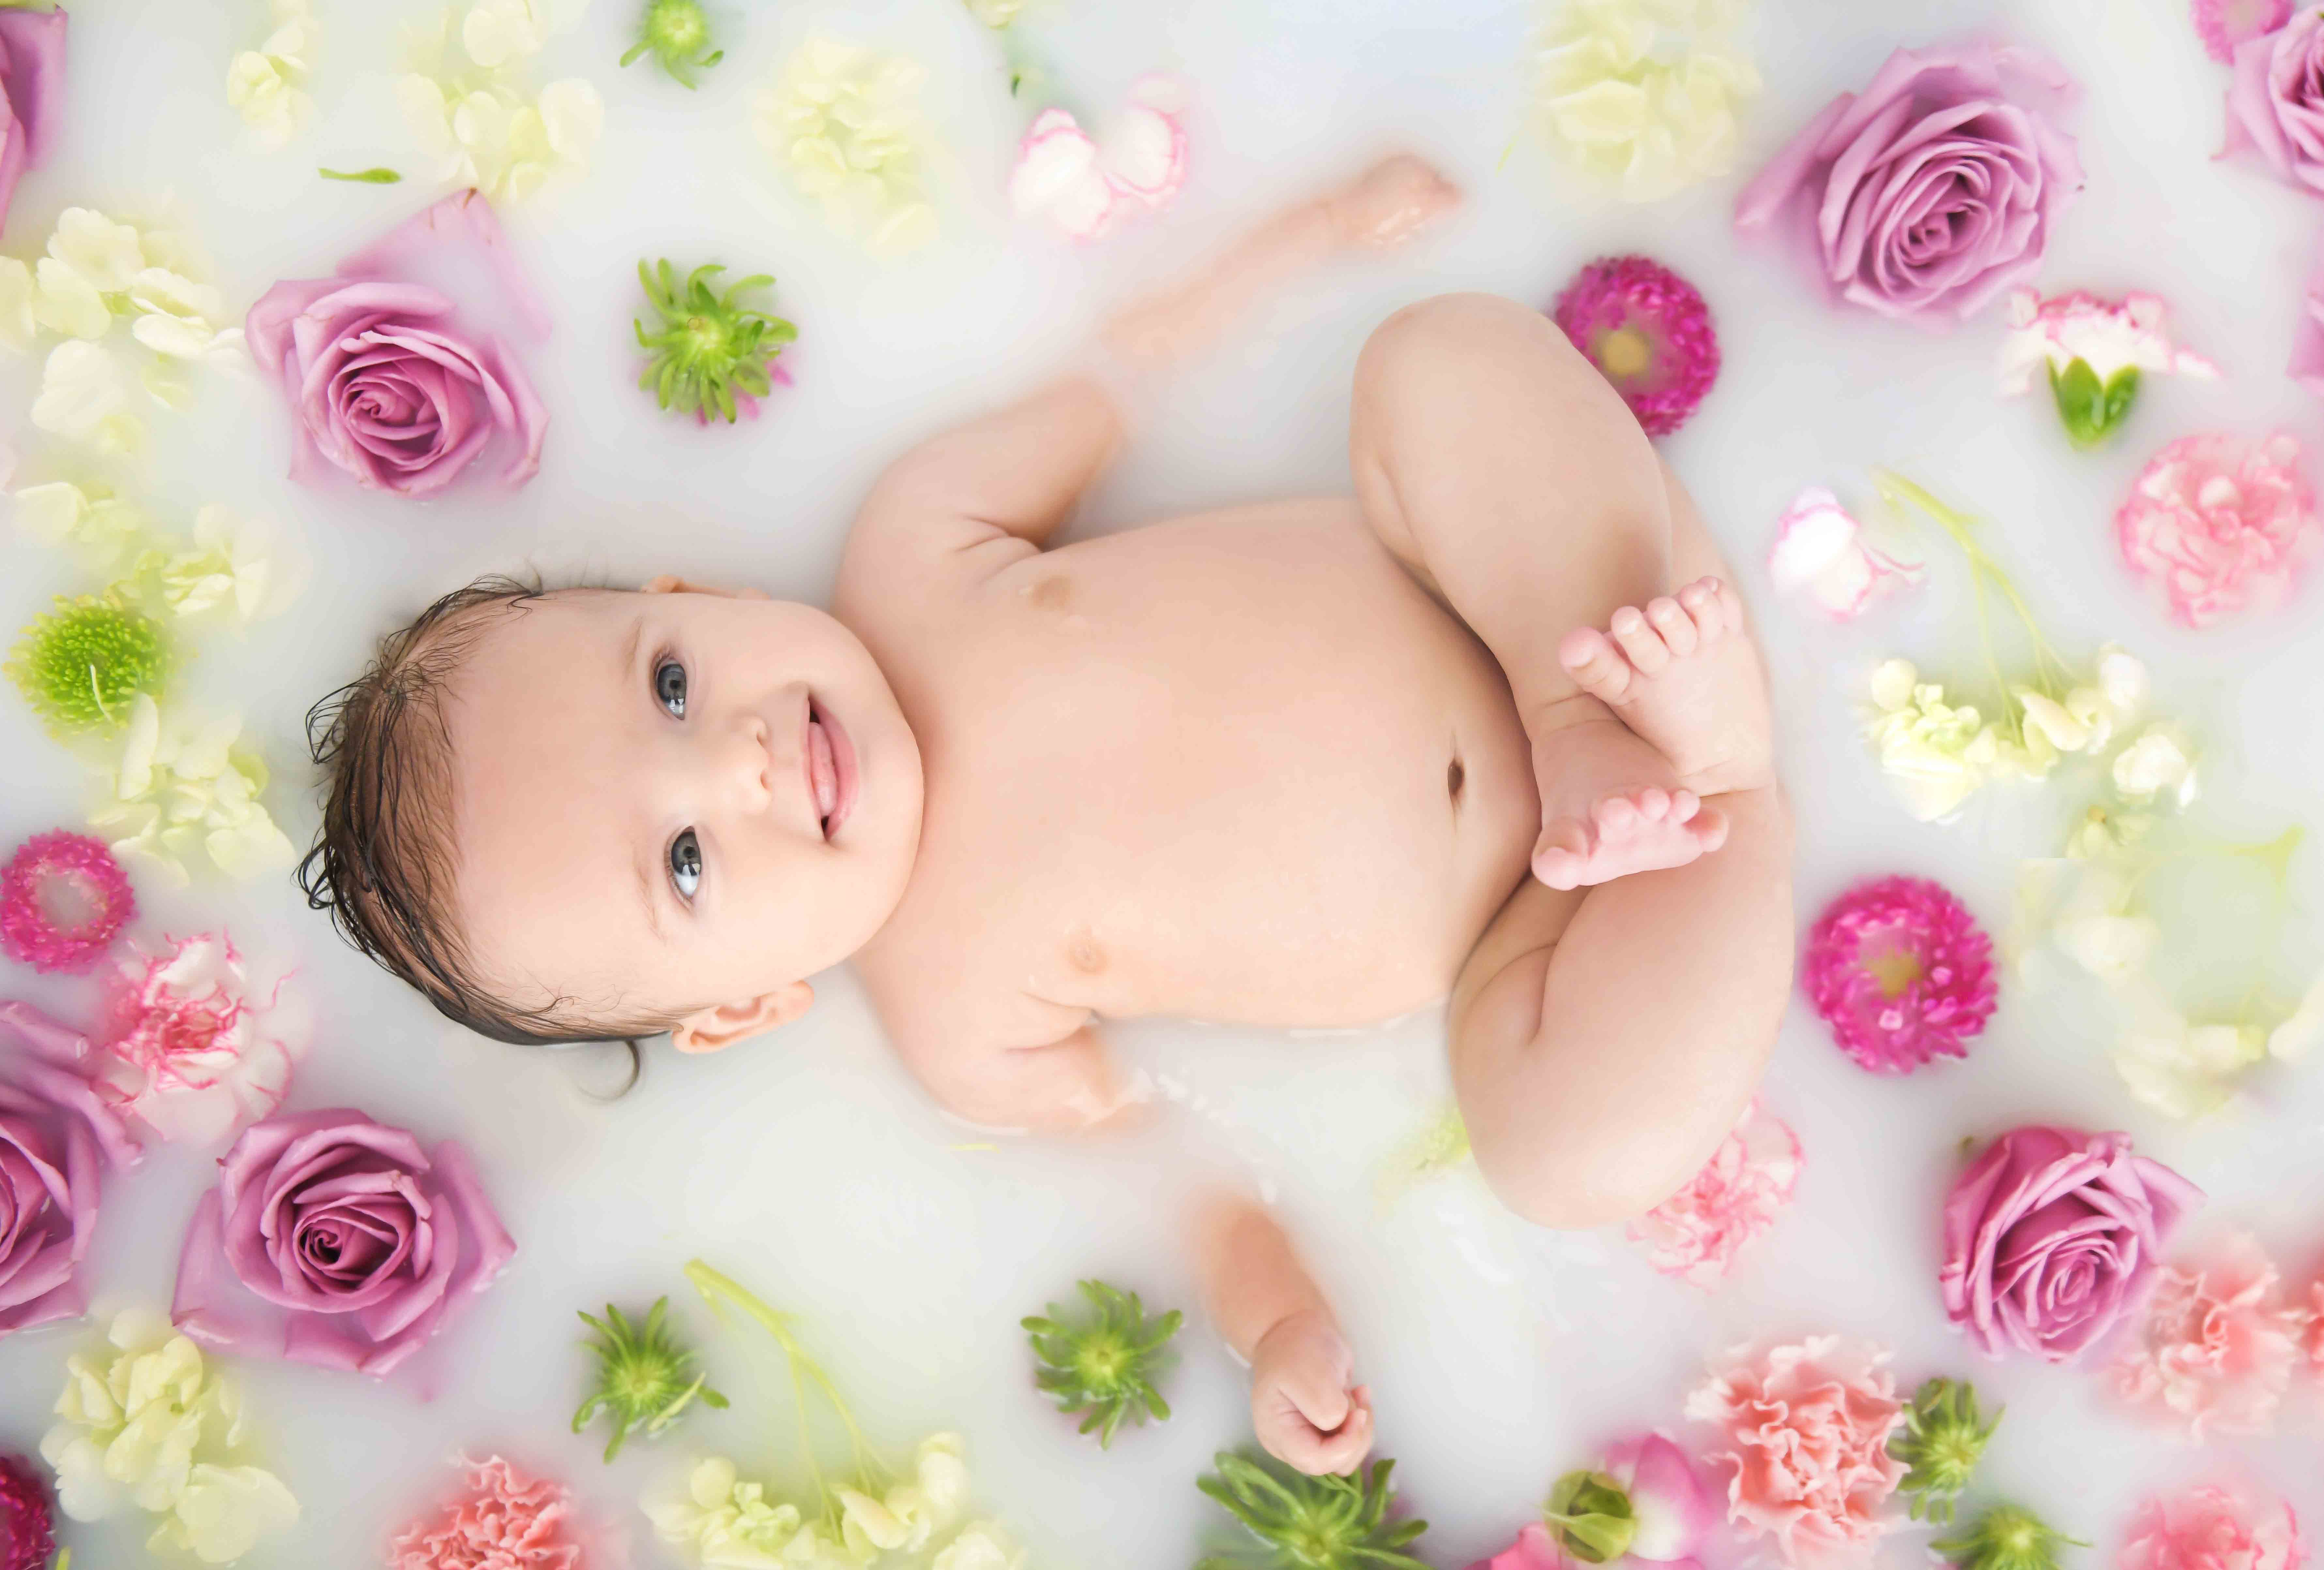 Breastmilk Bath For Baby : Cameron's First Birthday | Baby milk bath, Milk bath, Baby ... - Empty the breast milk into the water, and swirl to mix.